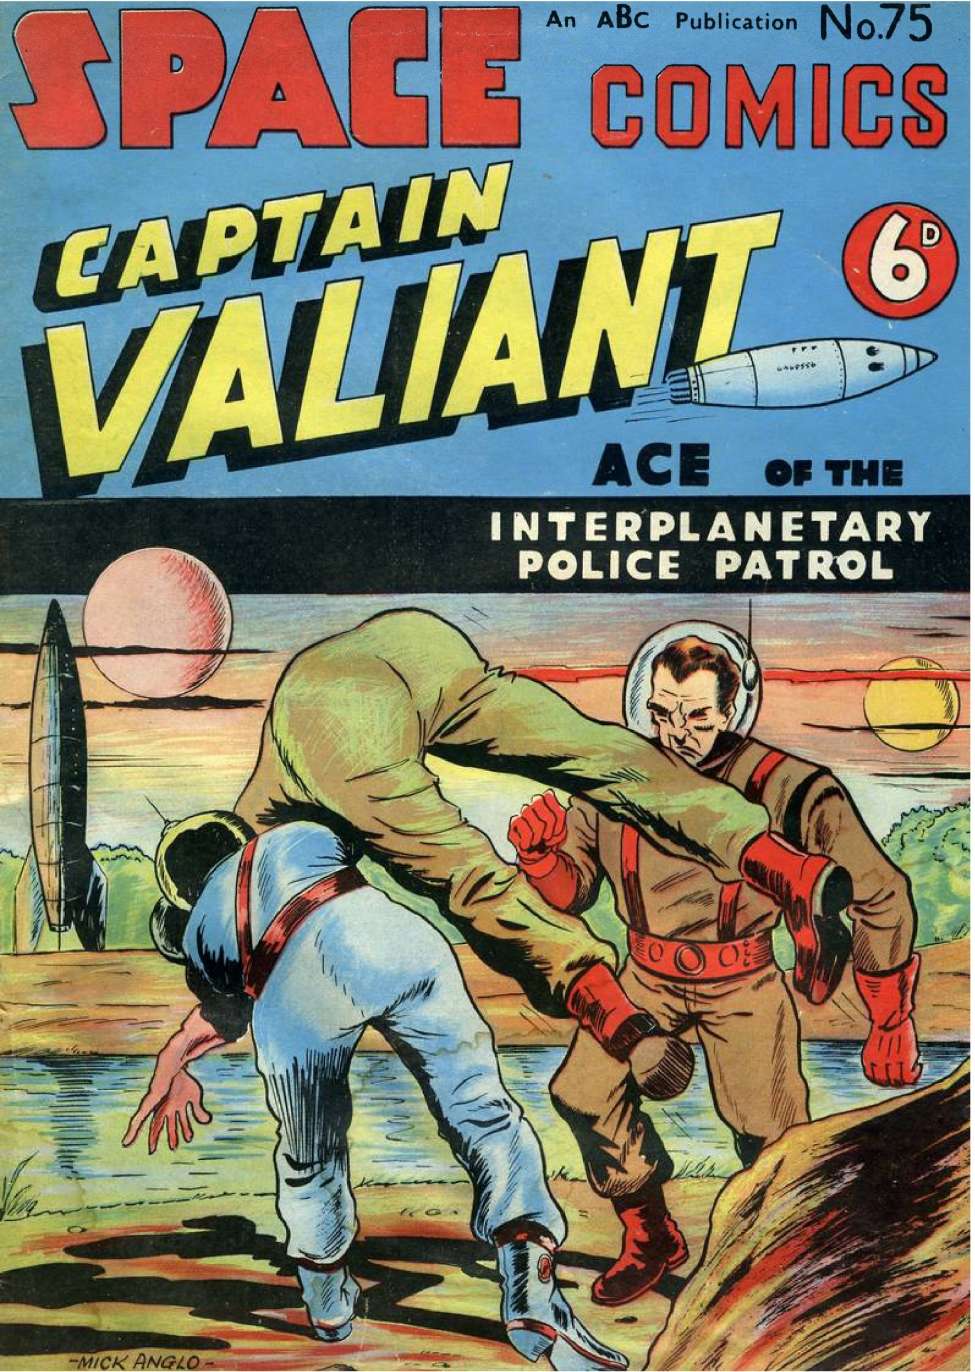 Comic Book Cover For Space Comics (Captain Valiant) 75